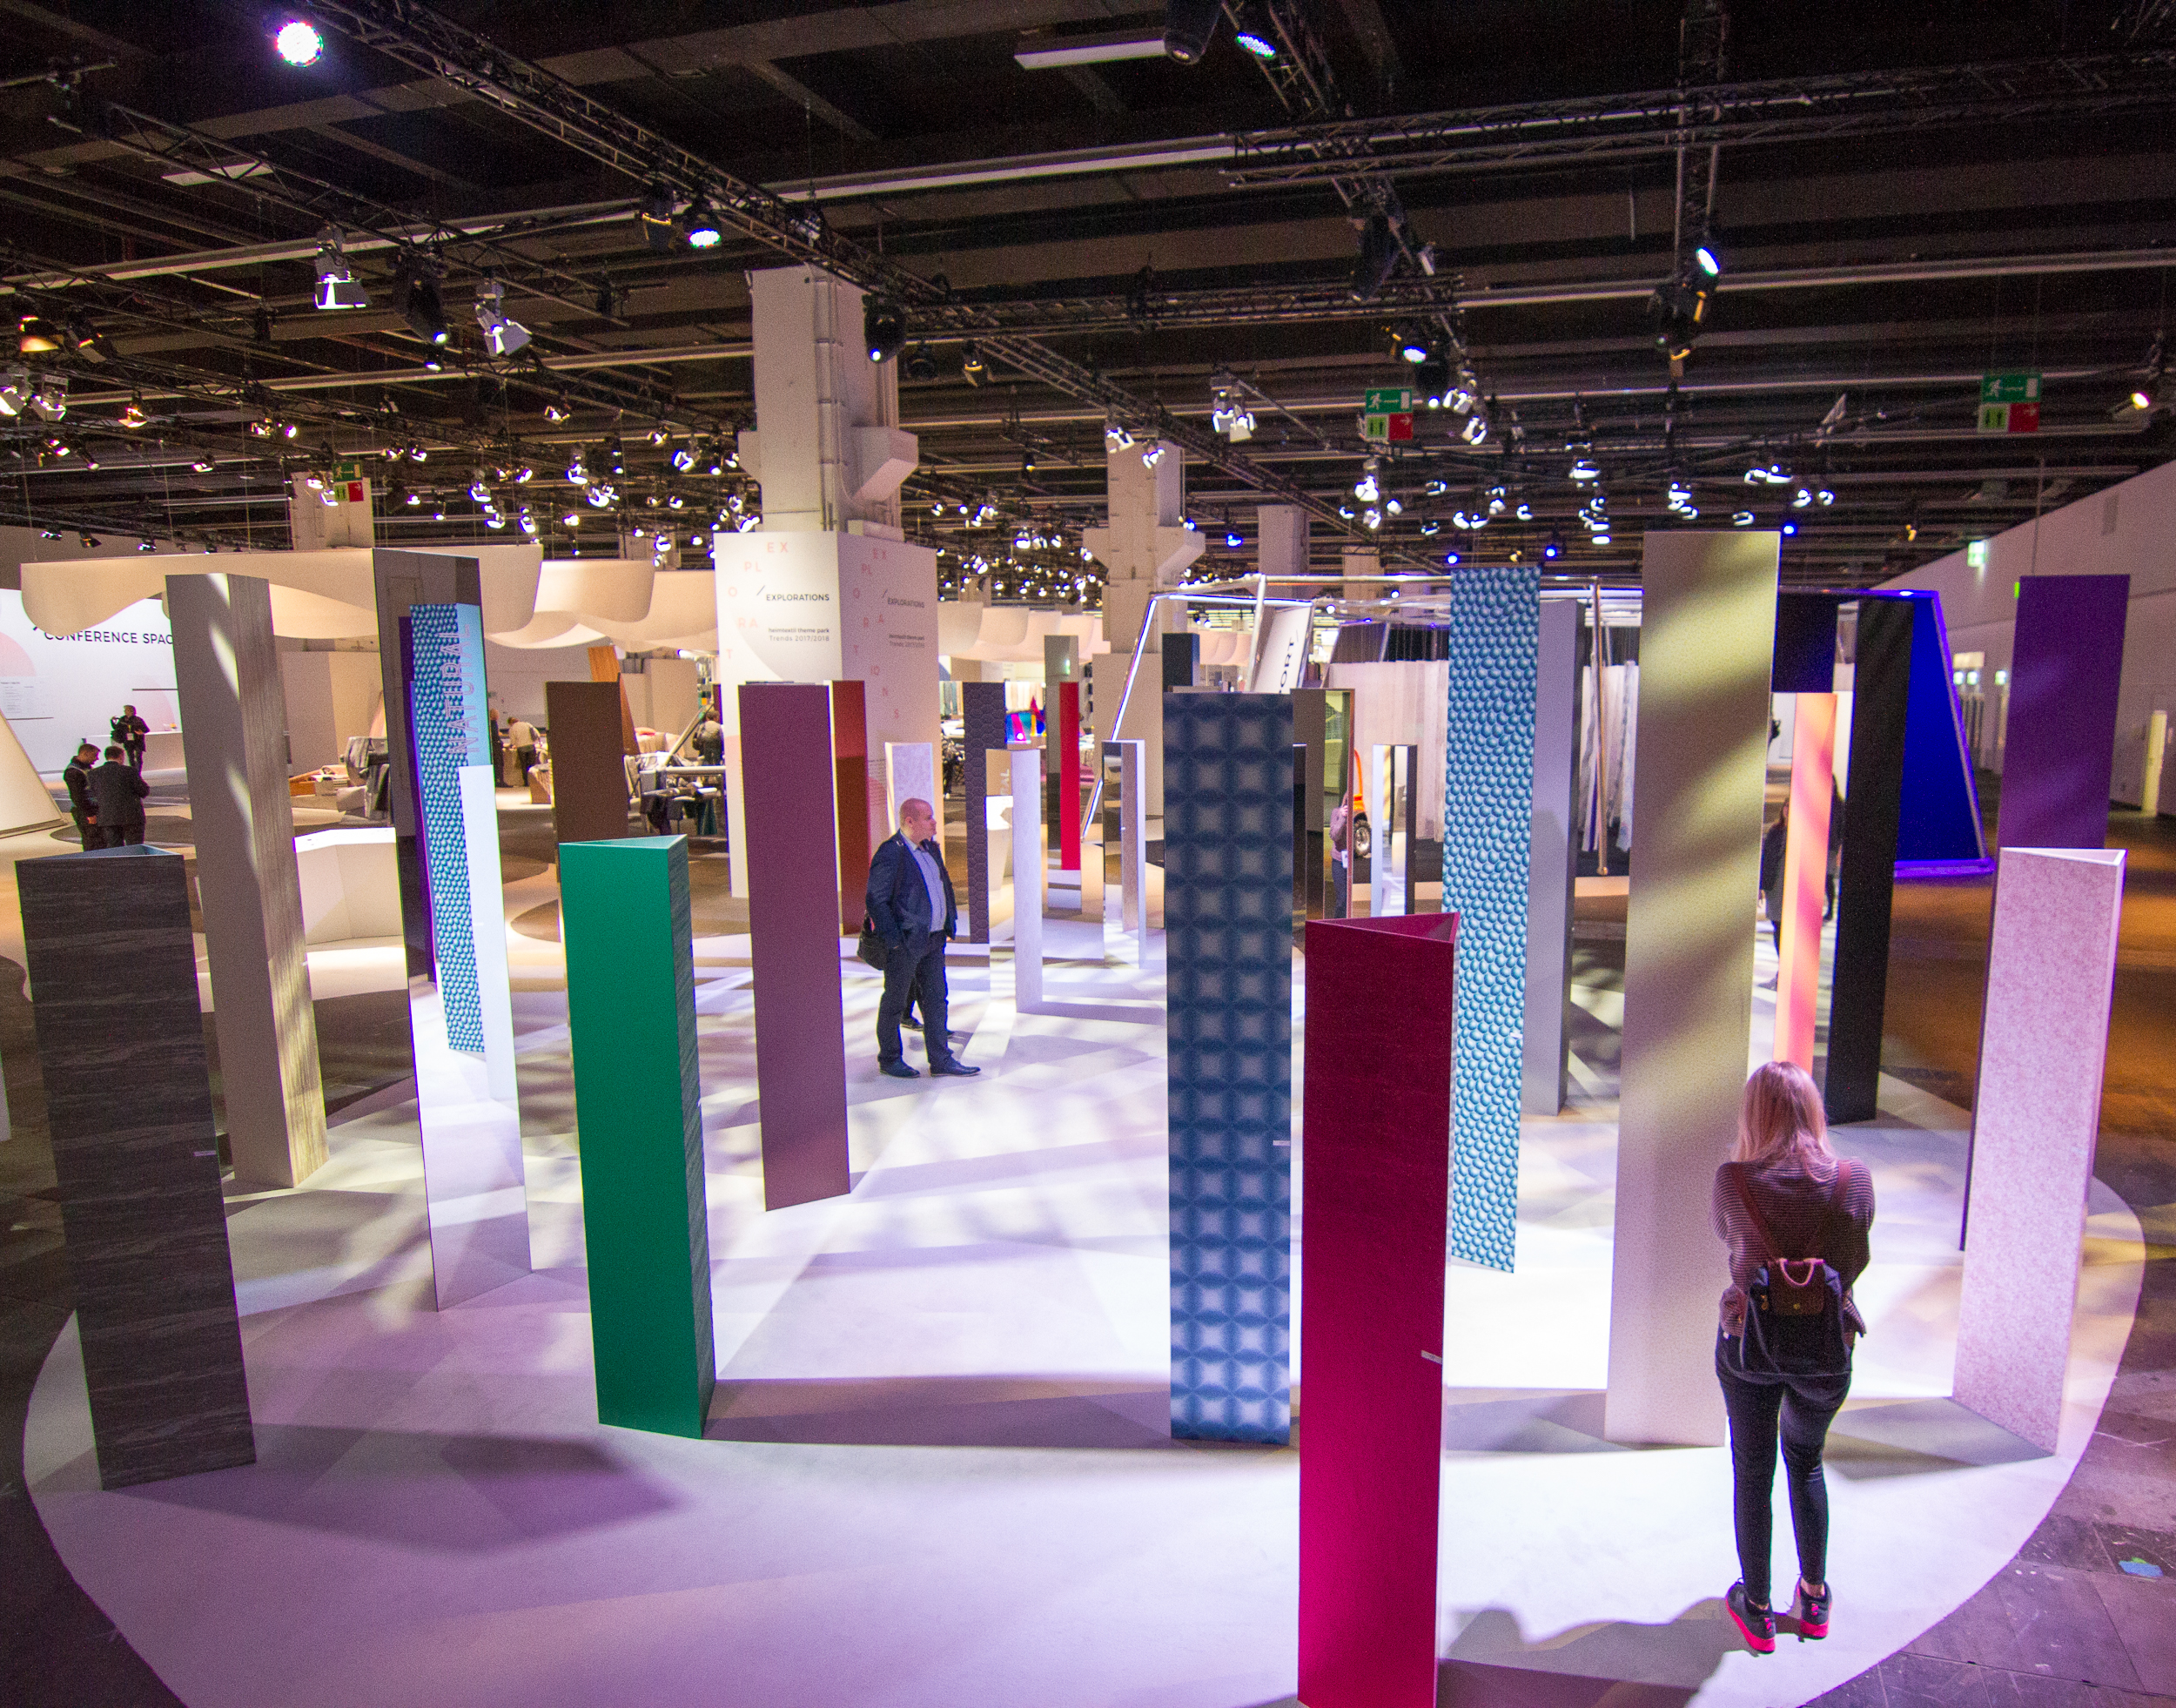  Heimtextil in Frankfurt is the first major design fair each year. An entire hall is dedicated to major trends in an&nbsp; exhibit called the 'Theme Park'. In 2017, the theme is "Explorations."&nbsp; 